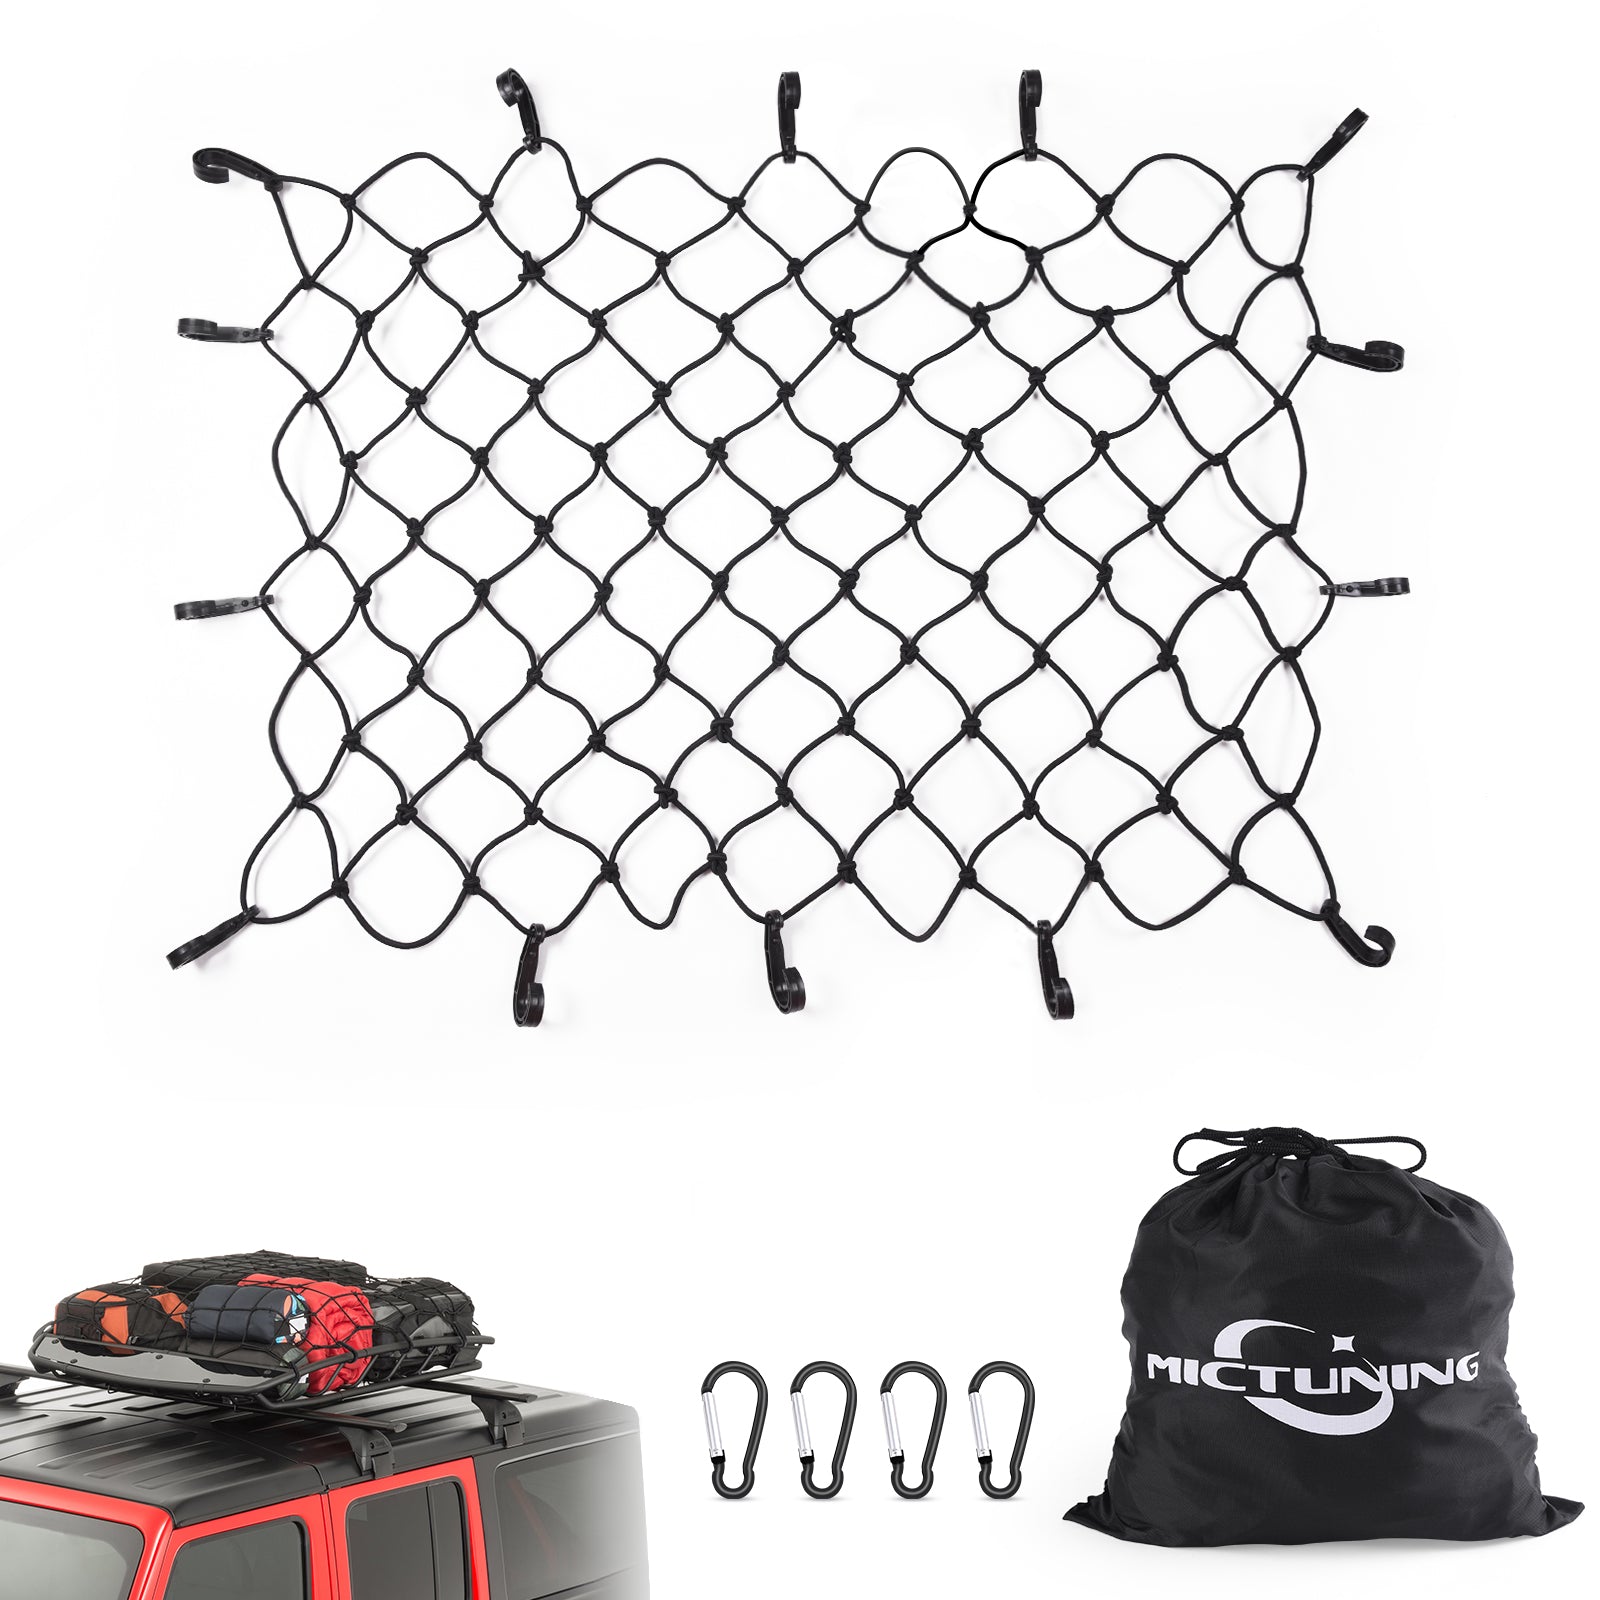 Mesh Cargo Nets 47" x 36", 6mm Heavy Duty Bungee Cord Net Stretches to 70" x 54" with 14pcs ABS Hooks 4pcs D Shape